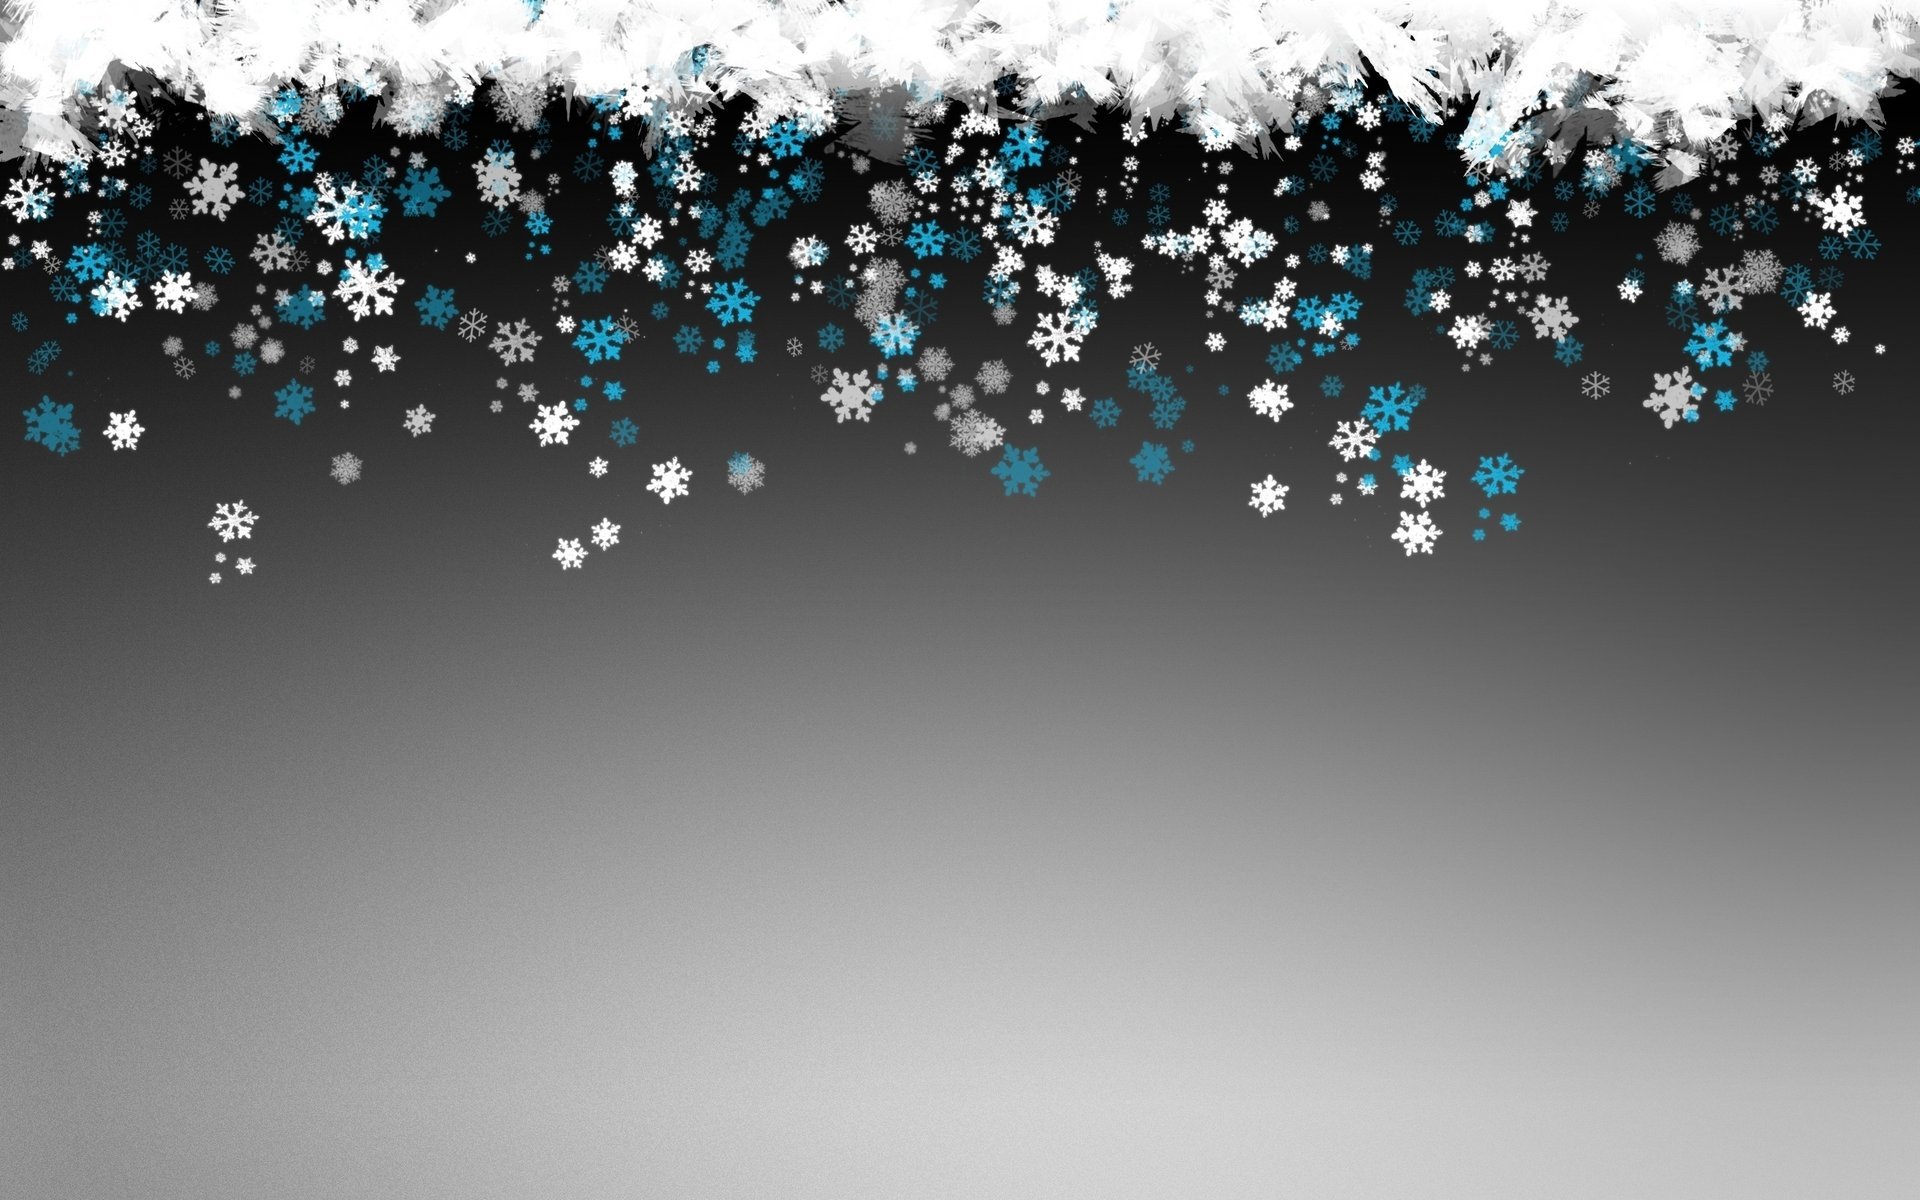 Snowflakes in winter for the new year